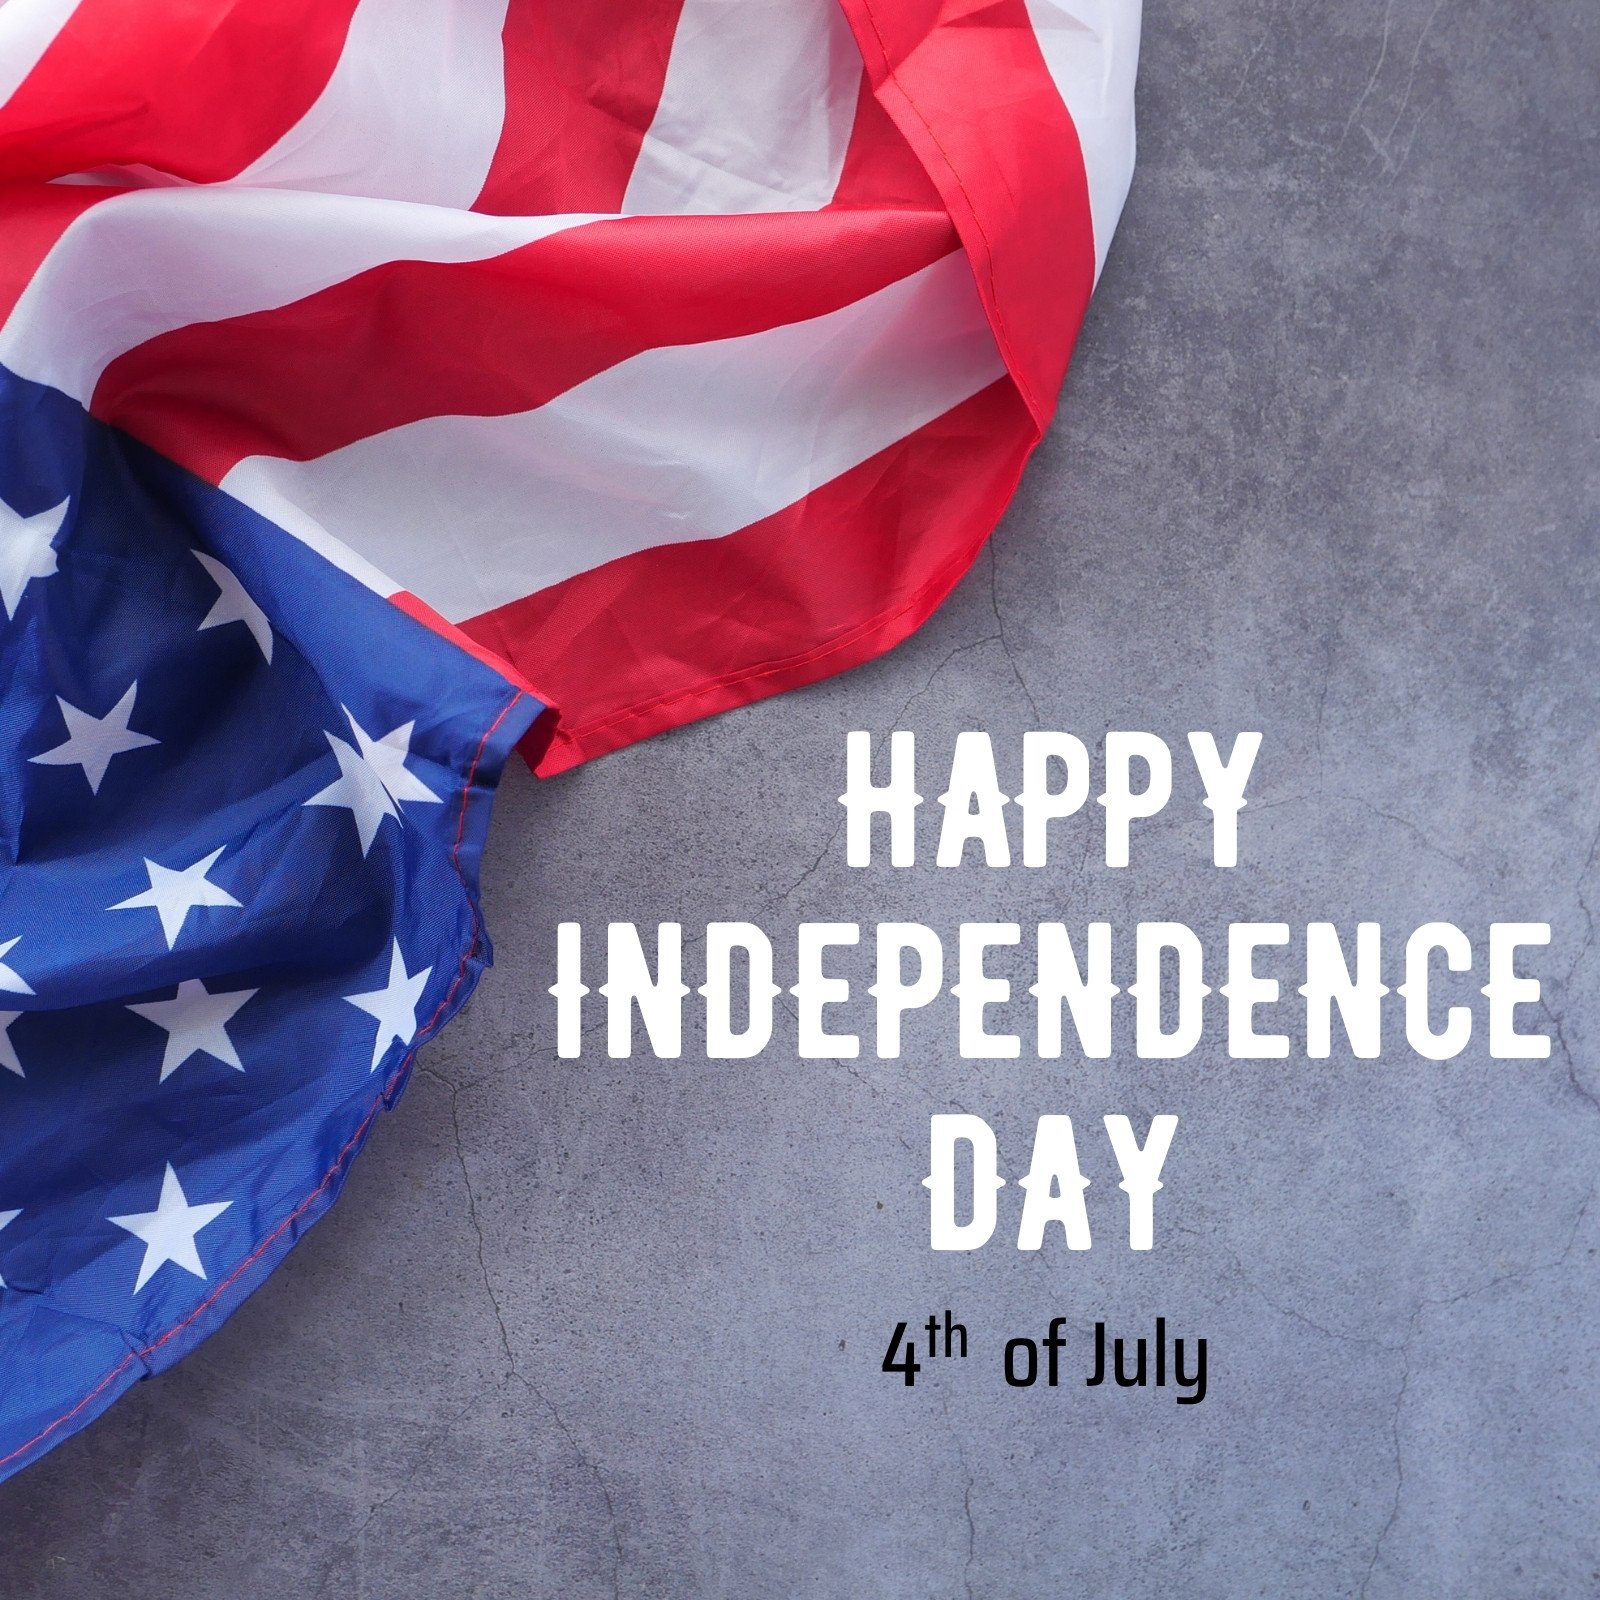 https://marketplace.canva.com/EAFFCazirmo/1/0/1600w/canva-independence-day-instagram-post-Xv8lWx7h6wk.jpg